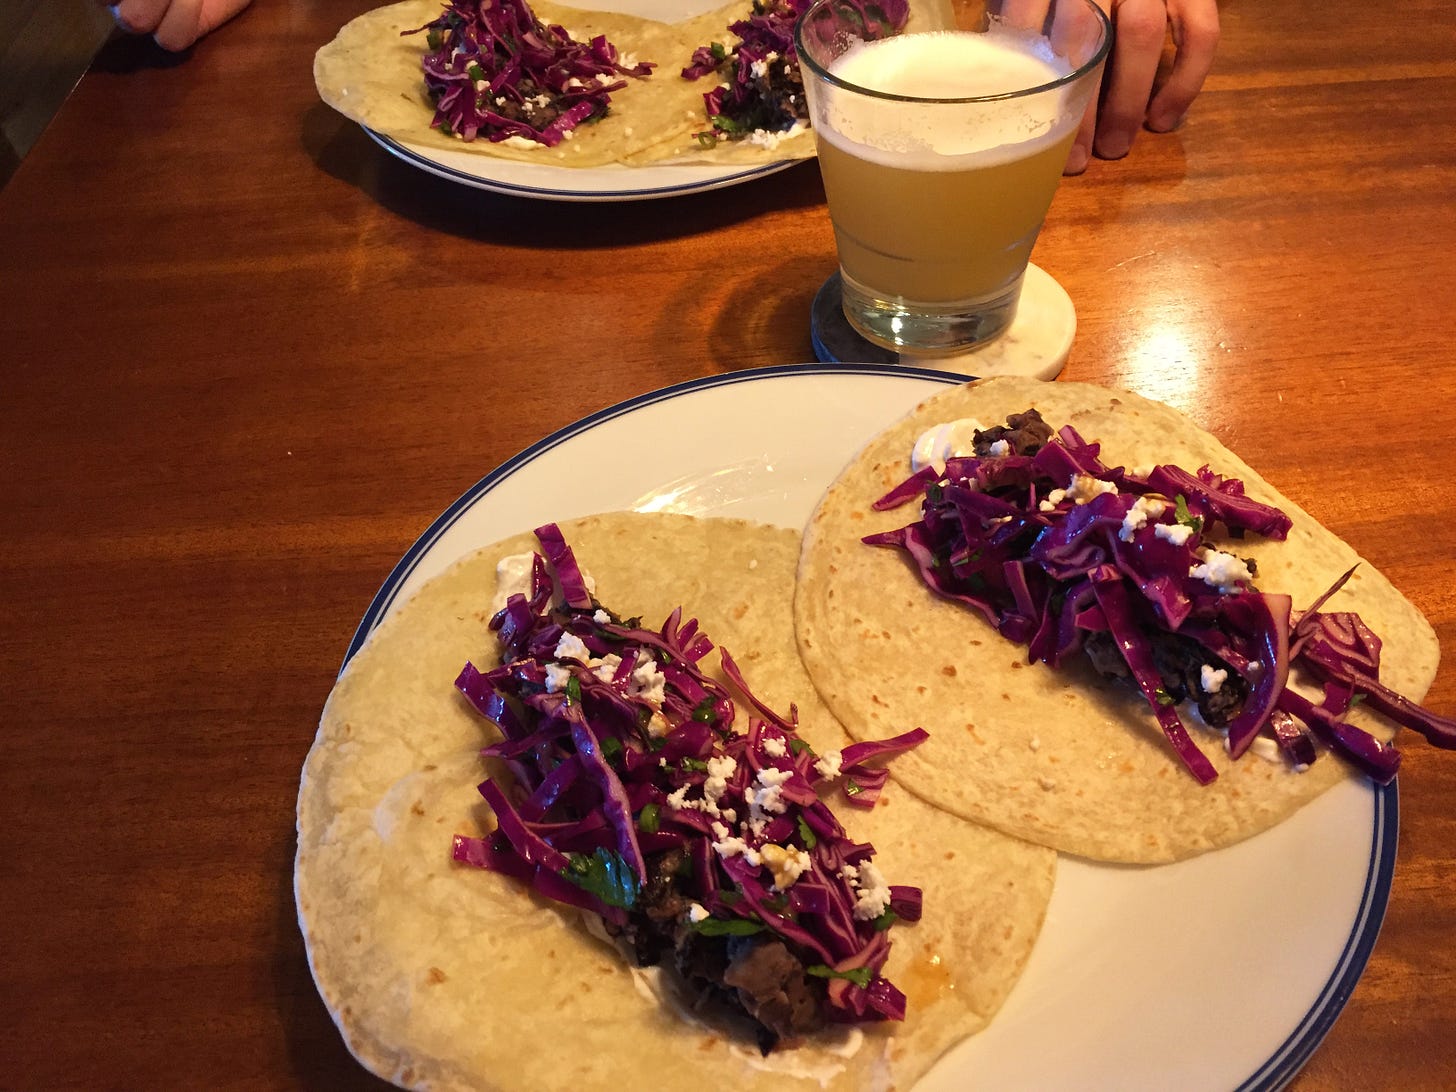 Two plates across from each other on a table, each with two toasted tortillas filled with black beans, feta, and red cabbage slaw. A glass of beer sits on a coaster between the plates.